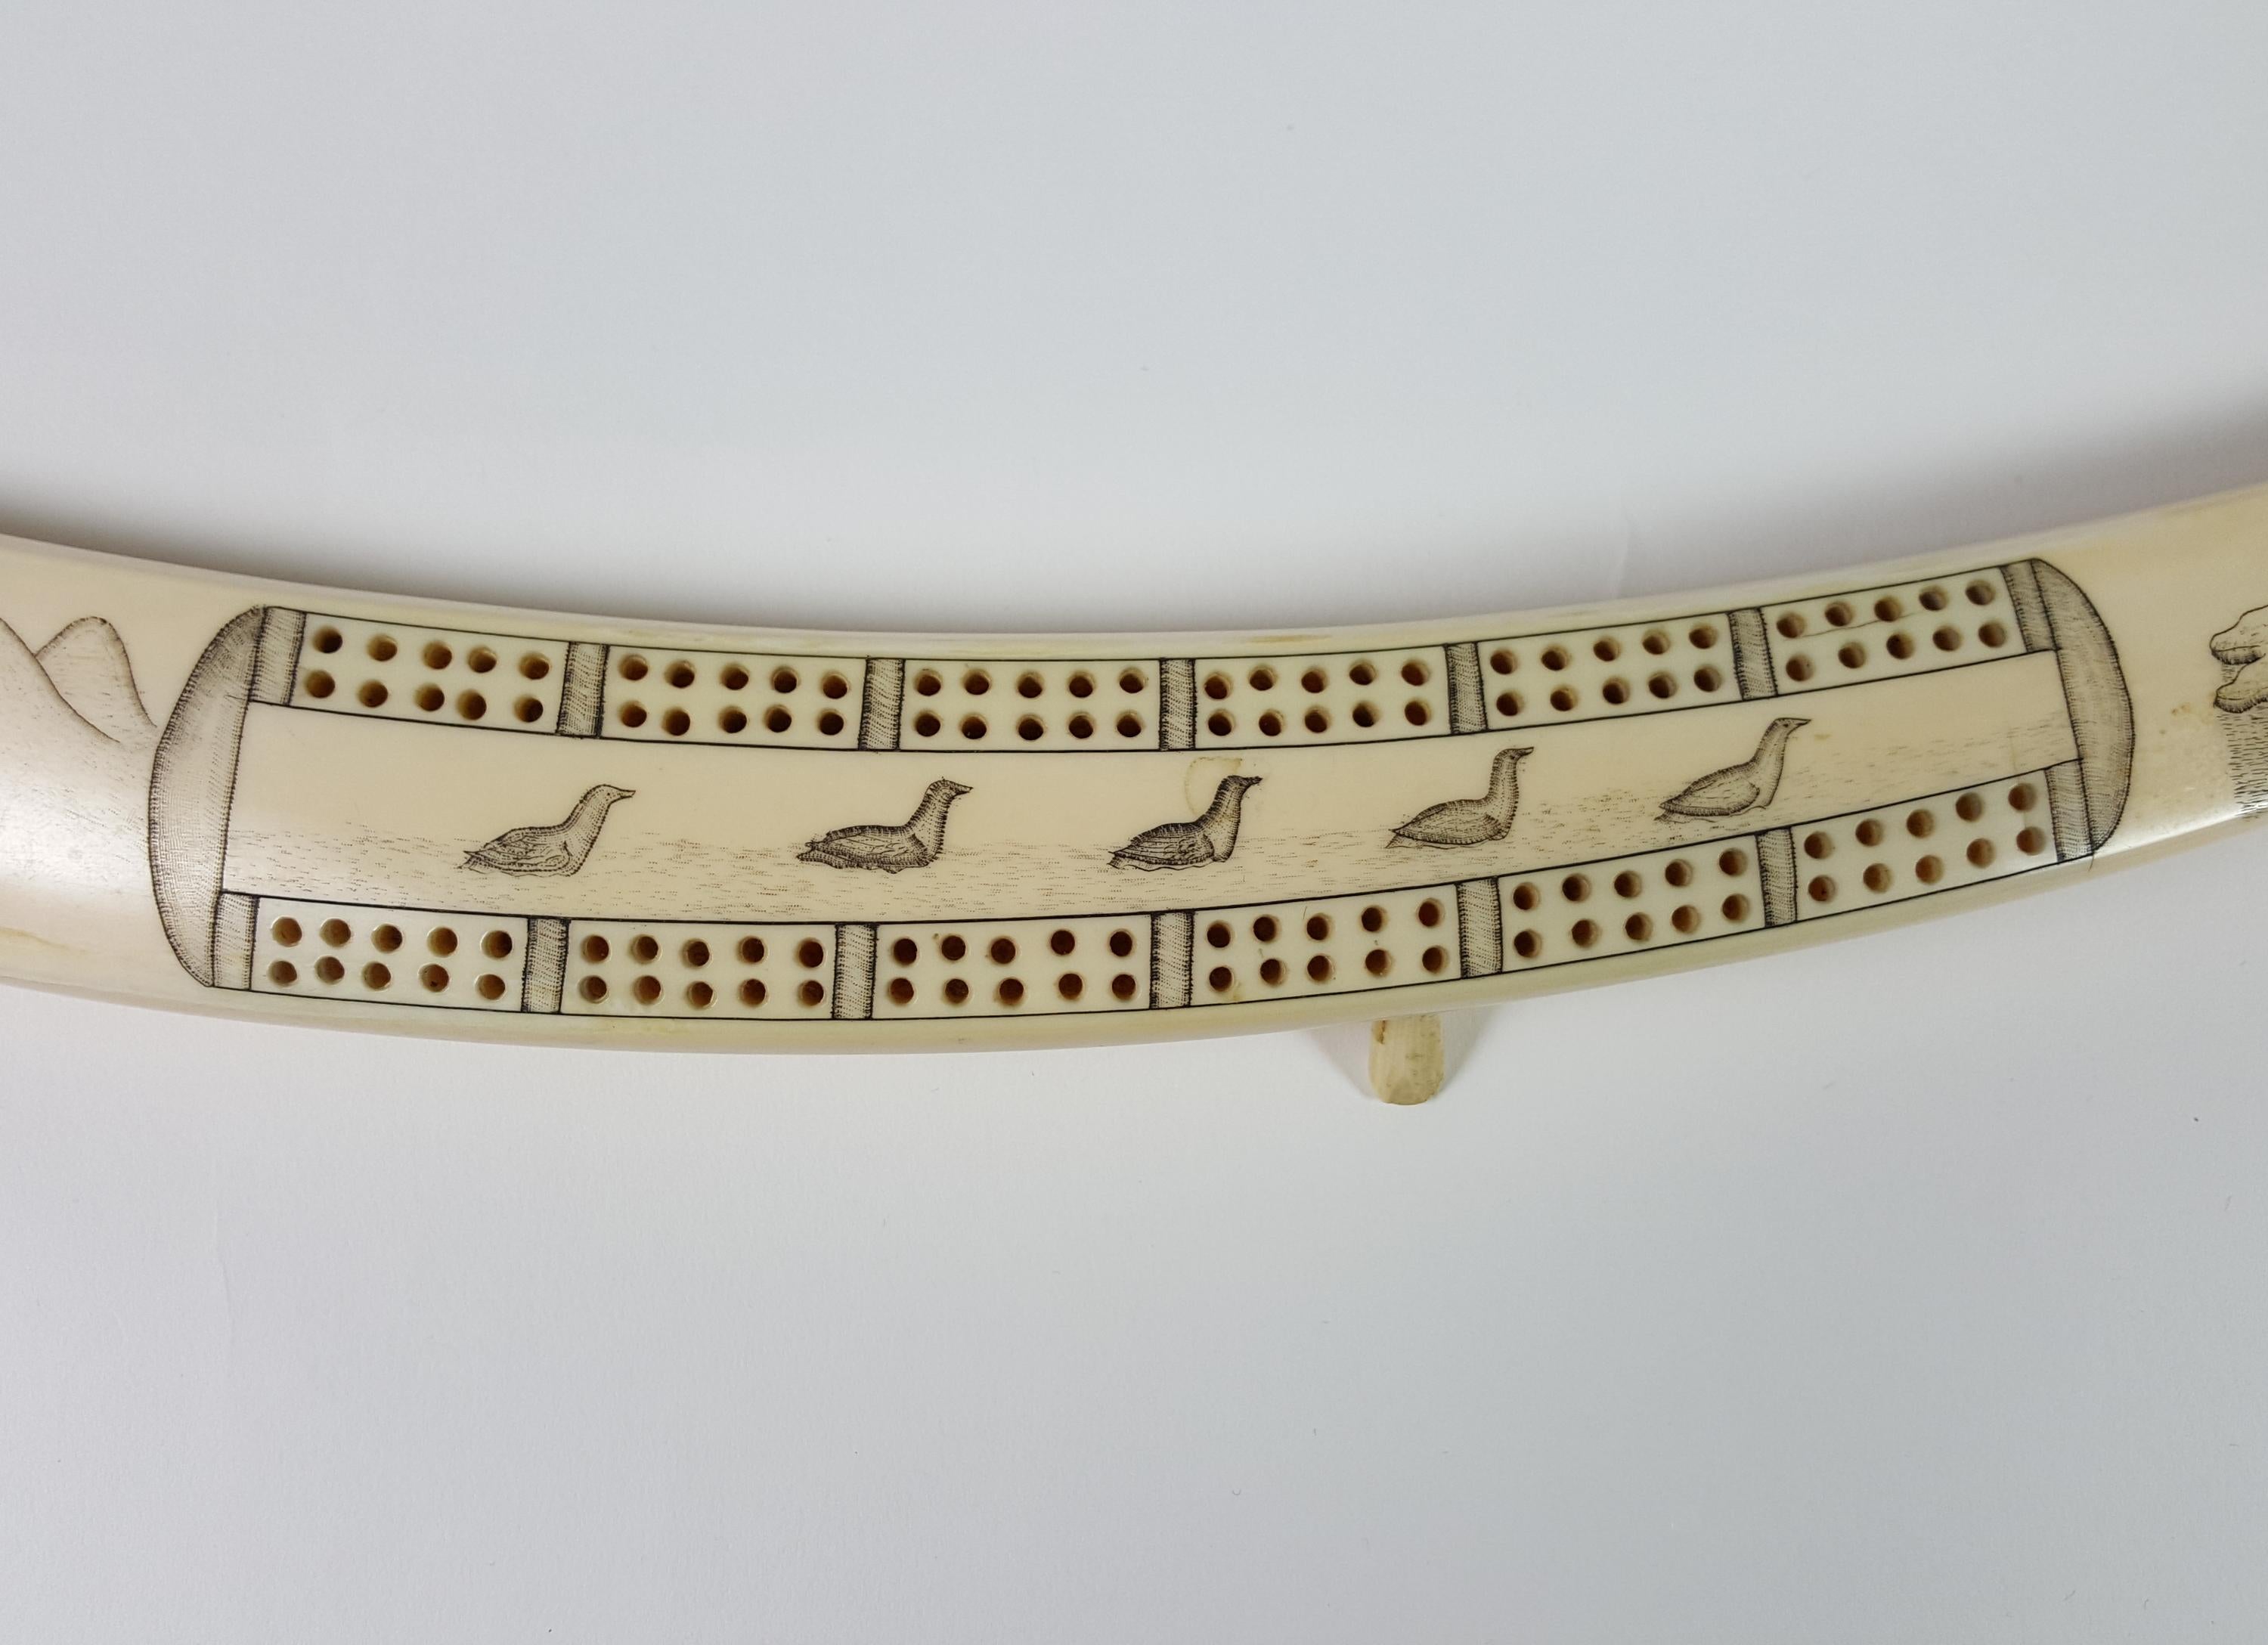 Really exceptional, antique, hand carved cribbage board. Carved from walrus tusk by a member of the Inuits, circa 1900.